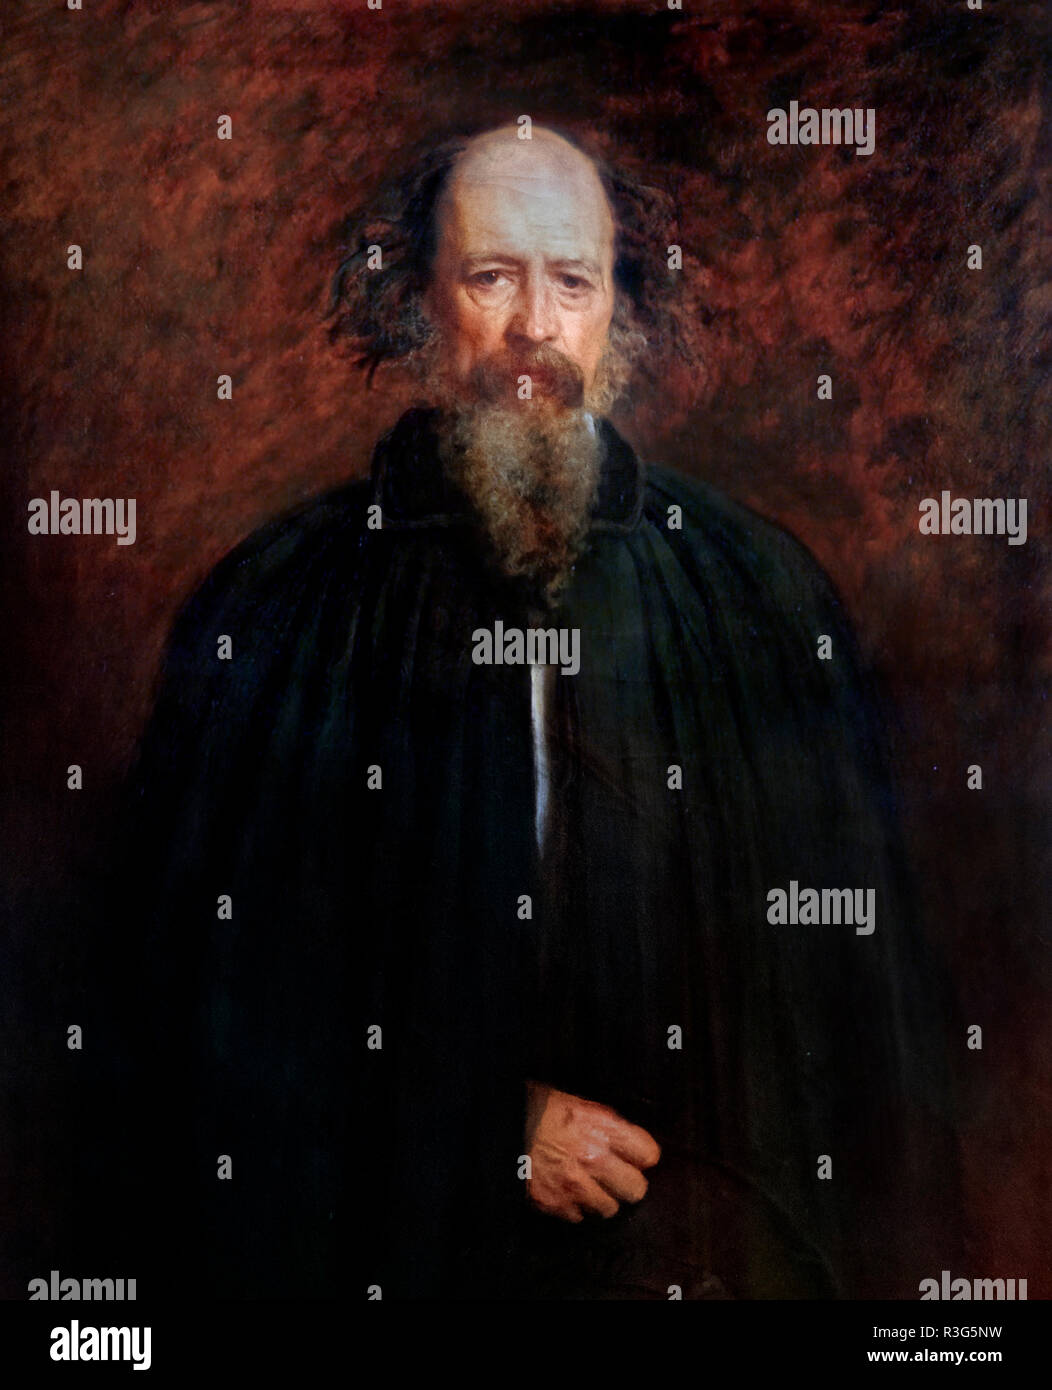 Alfred Tennyson. Portrait of the poet Alfred, Lord Tennyson (1809-1892) by John Everett Millais (1829-1896), oil on canvas, 1881 Stock Photo